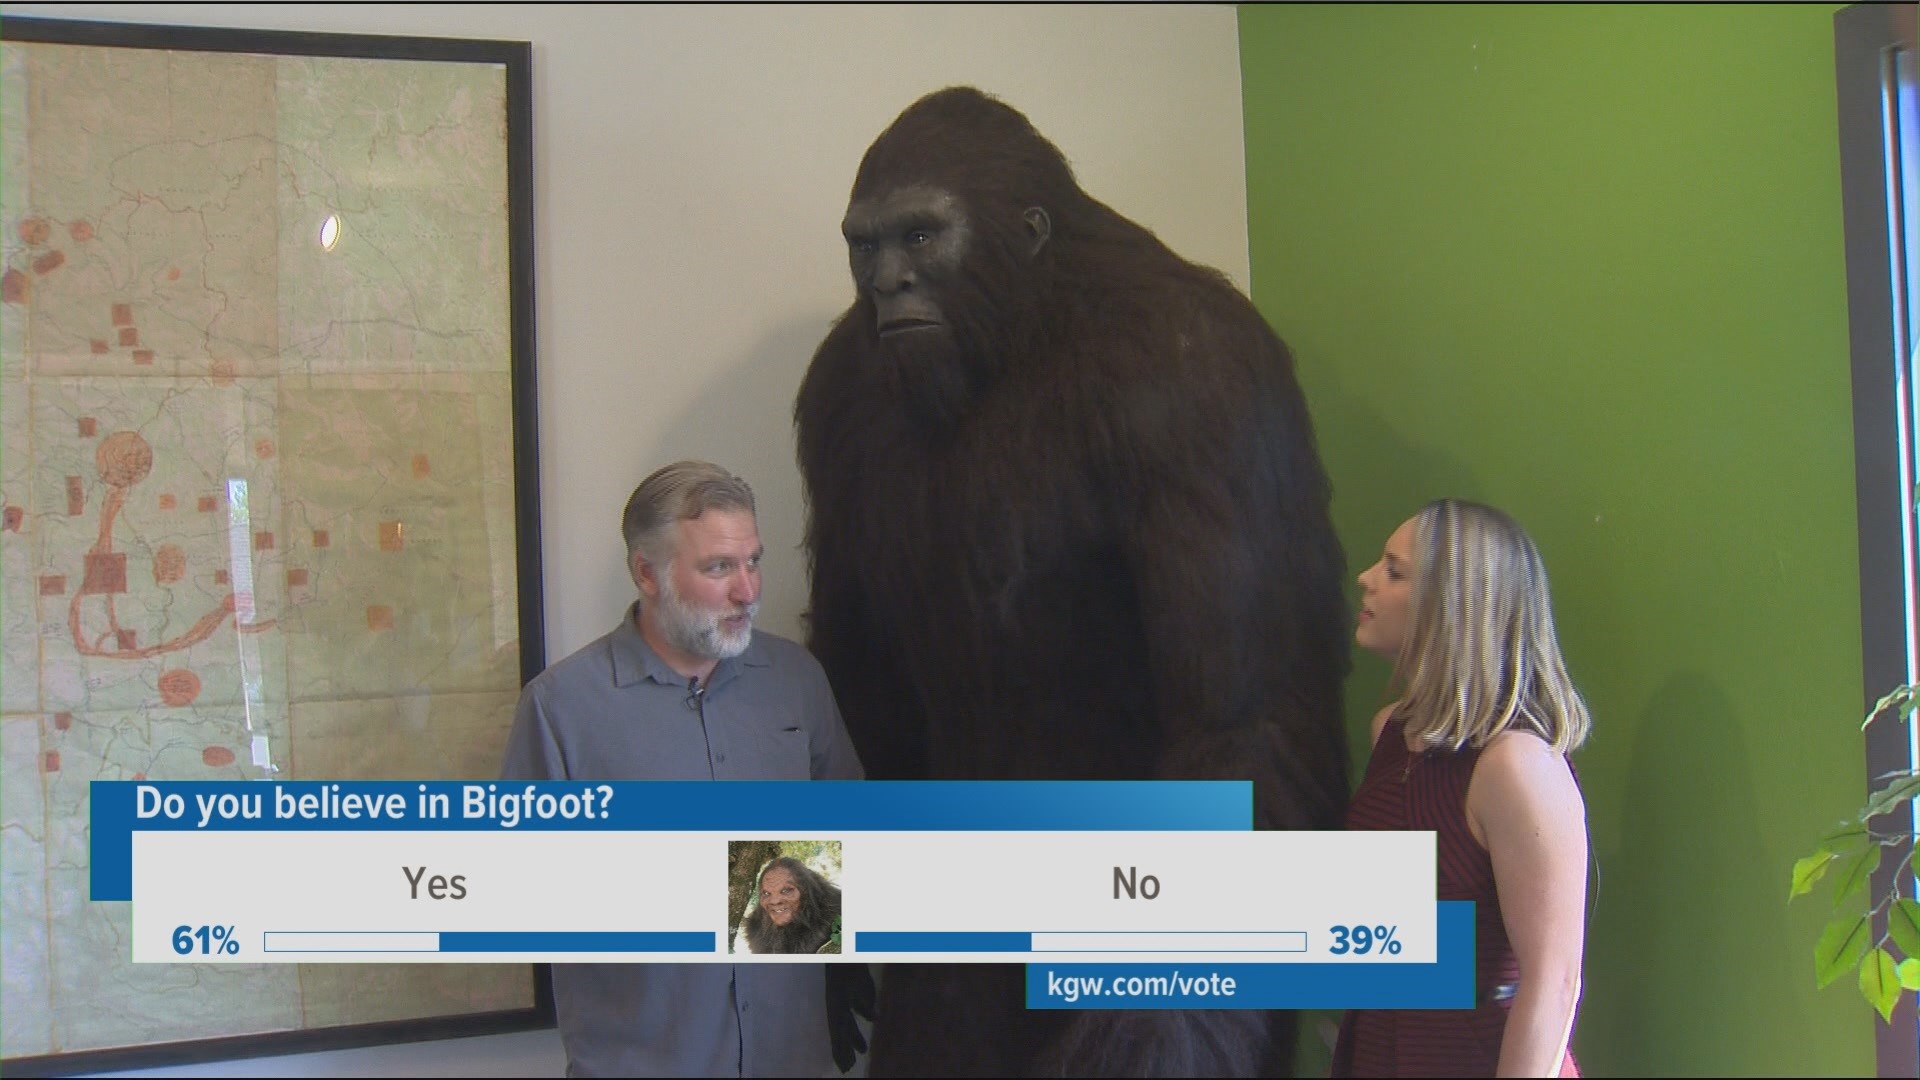 The legendary beast took over for a special edition of Tonight with Cassidy that featured the upcoming Oregon Bigfoot Festival happening August 17th in Troutdale, a new Bigfoot movie called #IAMBIGFOOT (that Cassidy is starring in!), and a visit to an Oregon museum full of Bigfoot history and exhibits!

https://www.oregonbigfootfestival.com/

https://www.indiegogo.com/projects/iambigfoot#/

https://www.northamericanbigfootcenter.com/?fbclid=IwAR0r62_Lx4jvuyCiTgXHILn4UCm1hykDf7EMeYzEza5oWrF